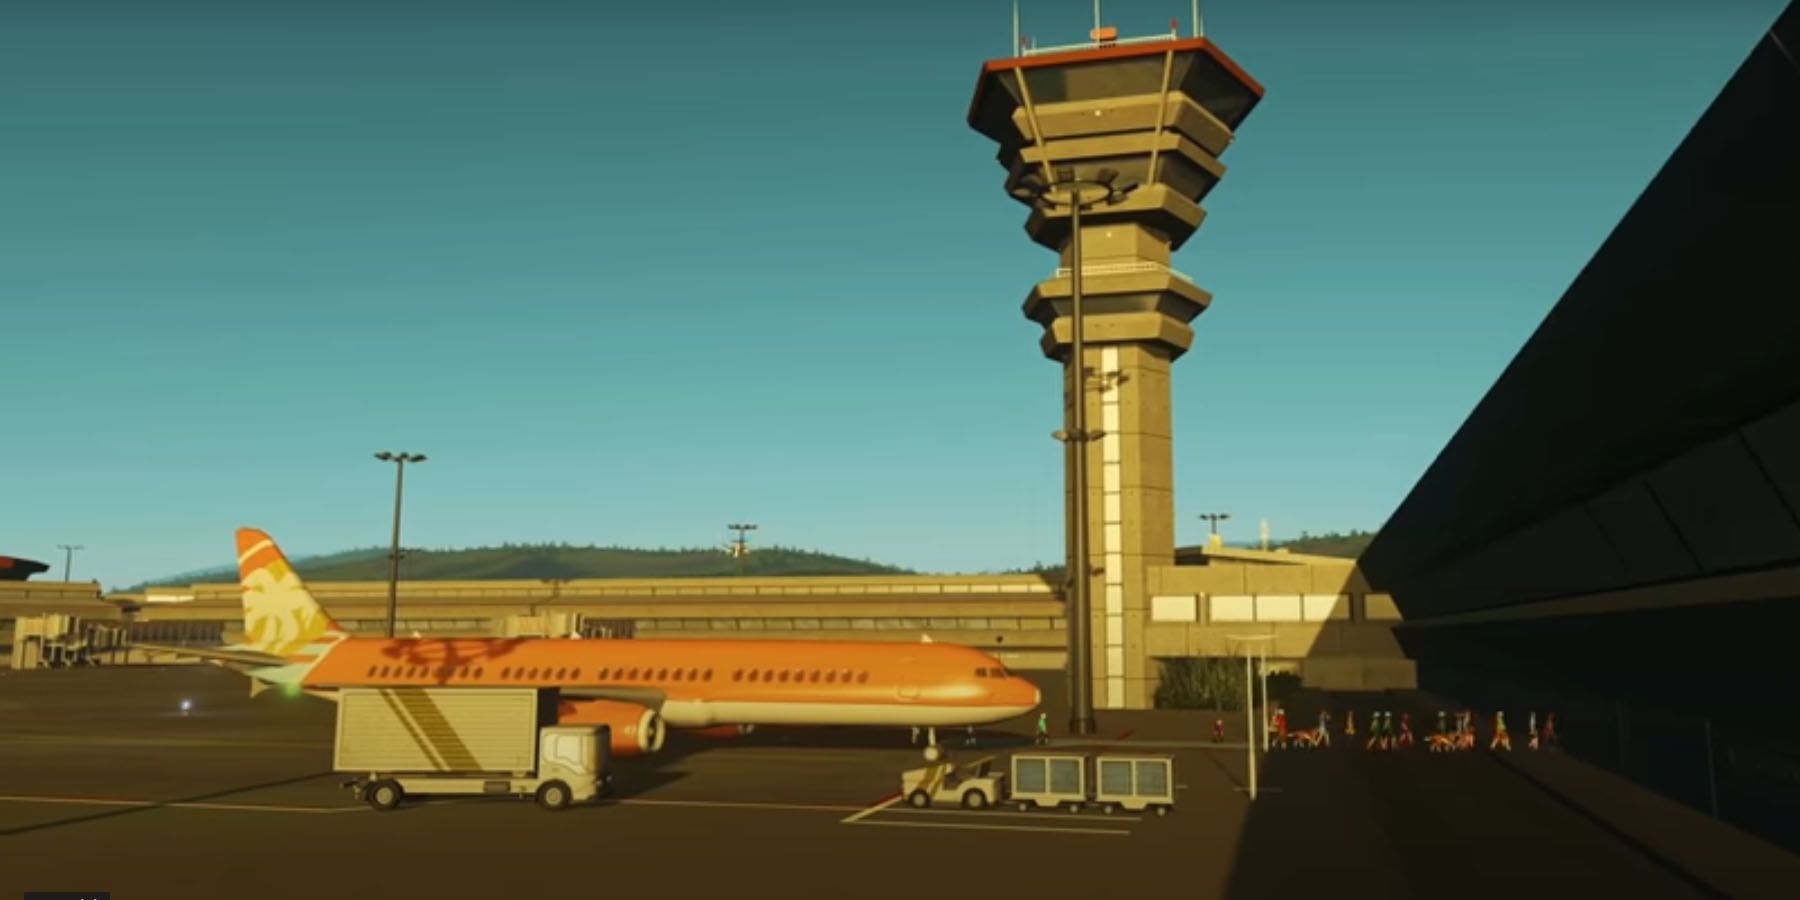 A tower in an airport in Airports DLC